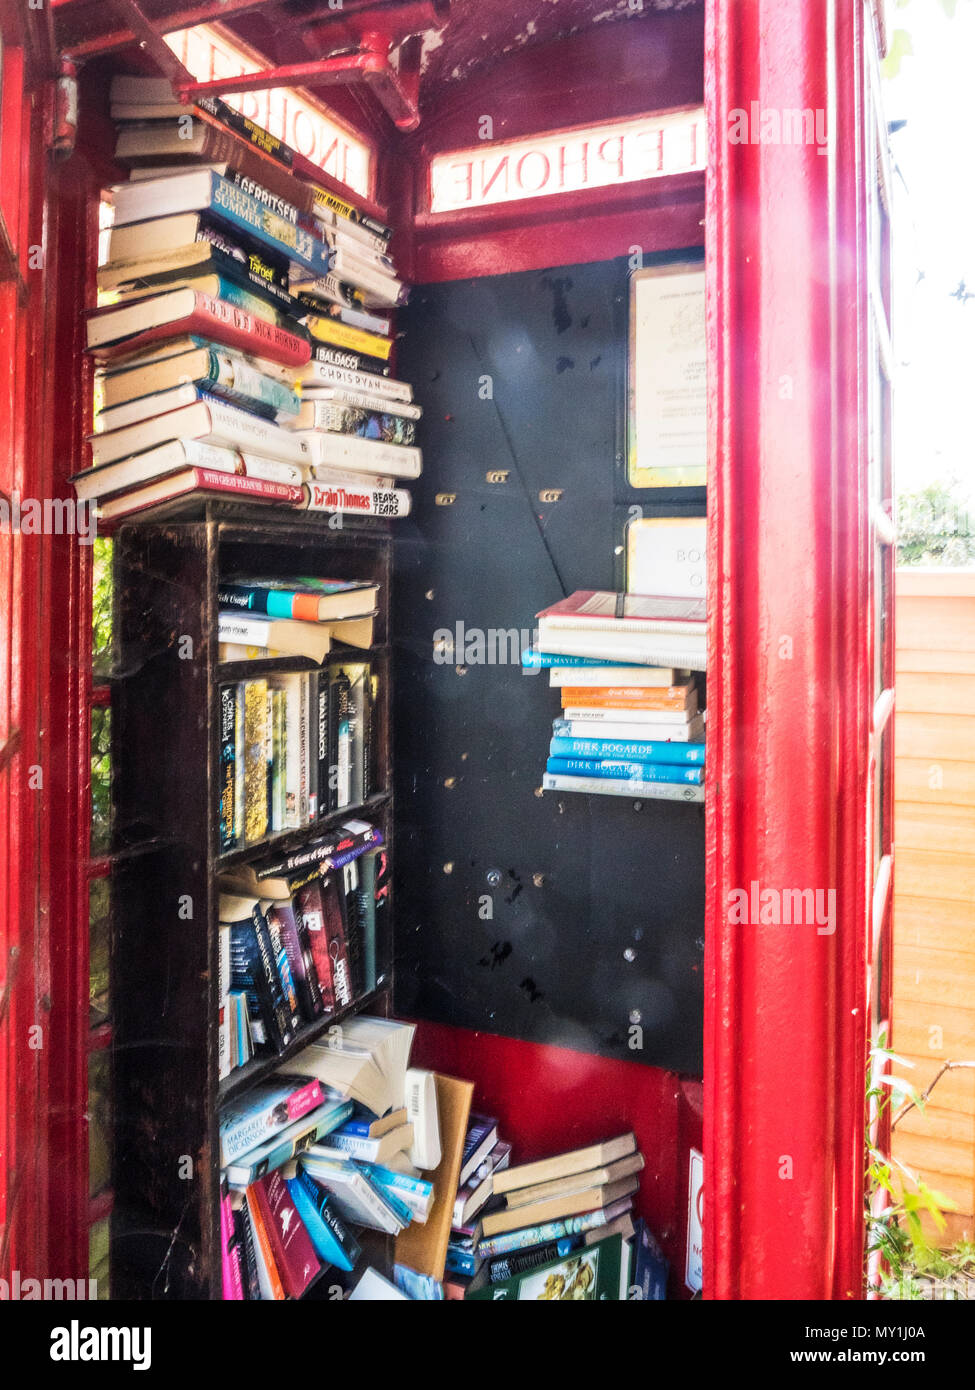 An old red telephone box used as a book swap location in a Wiltshire village. Stock Photo